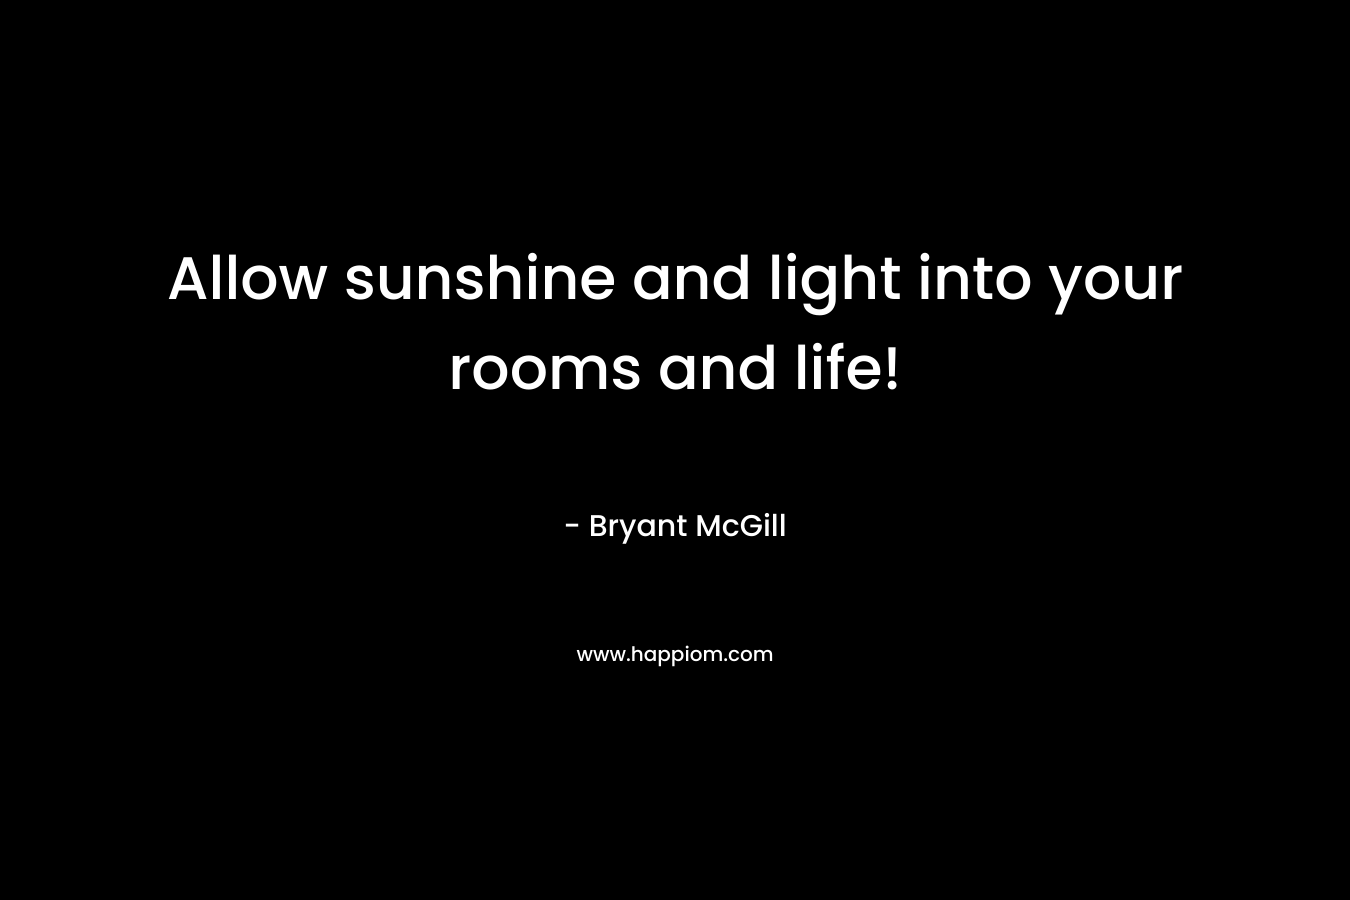 Allow sunshine and light into your rooms and life! – Bryant McGill